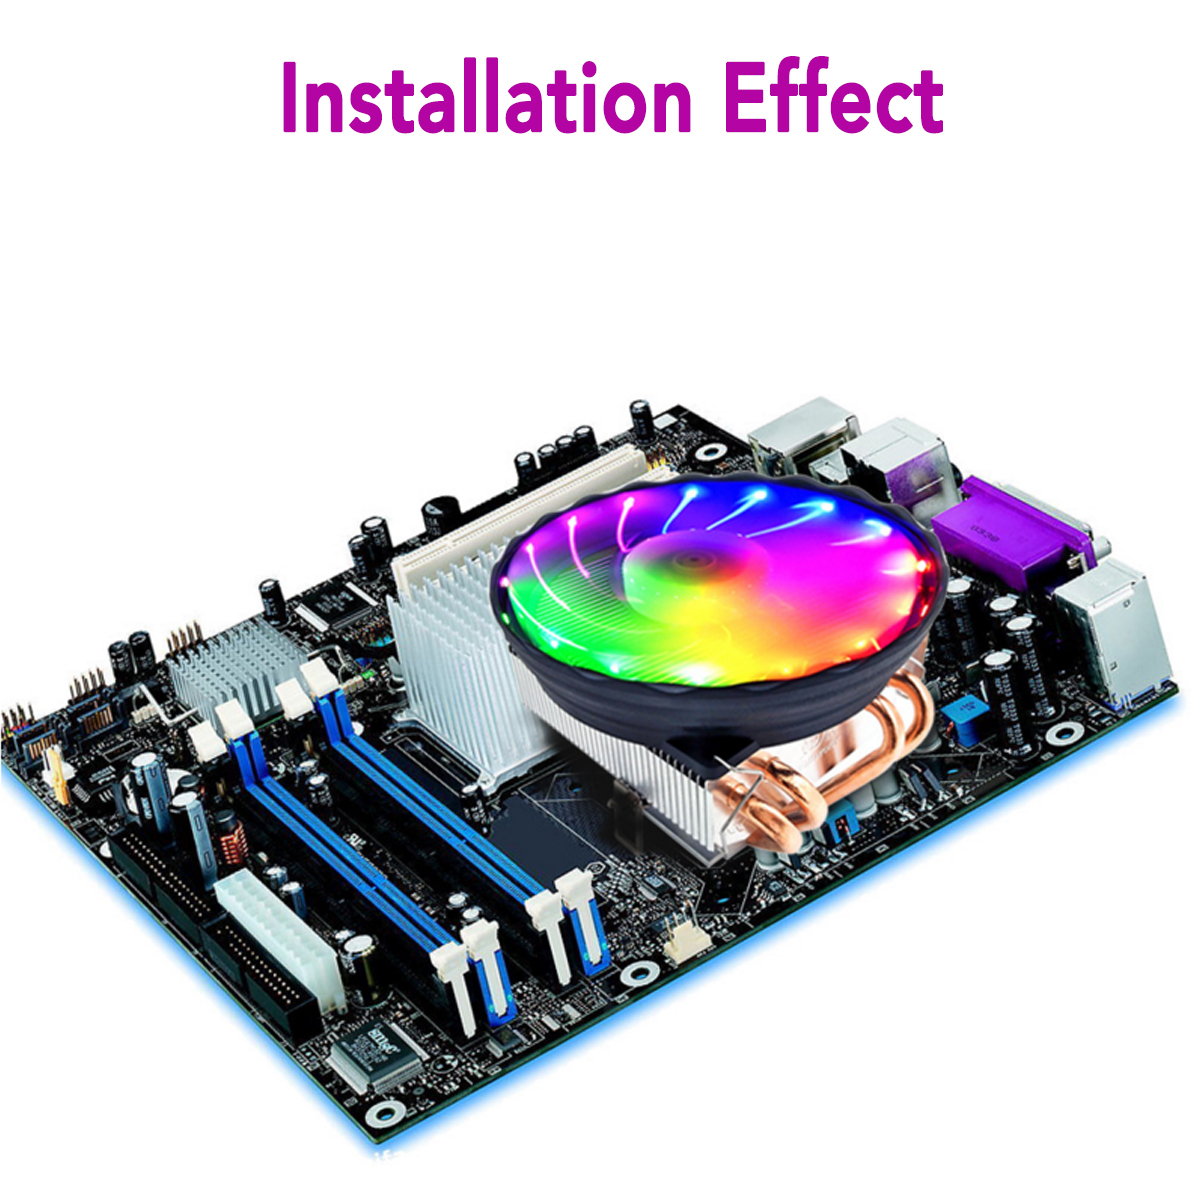 DC 12V 4Pin Colorful Backlight 120mm CPU Cooling Fan PC Heatsink for Intel/AMD For PC Computer Case 17